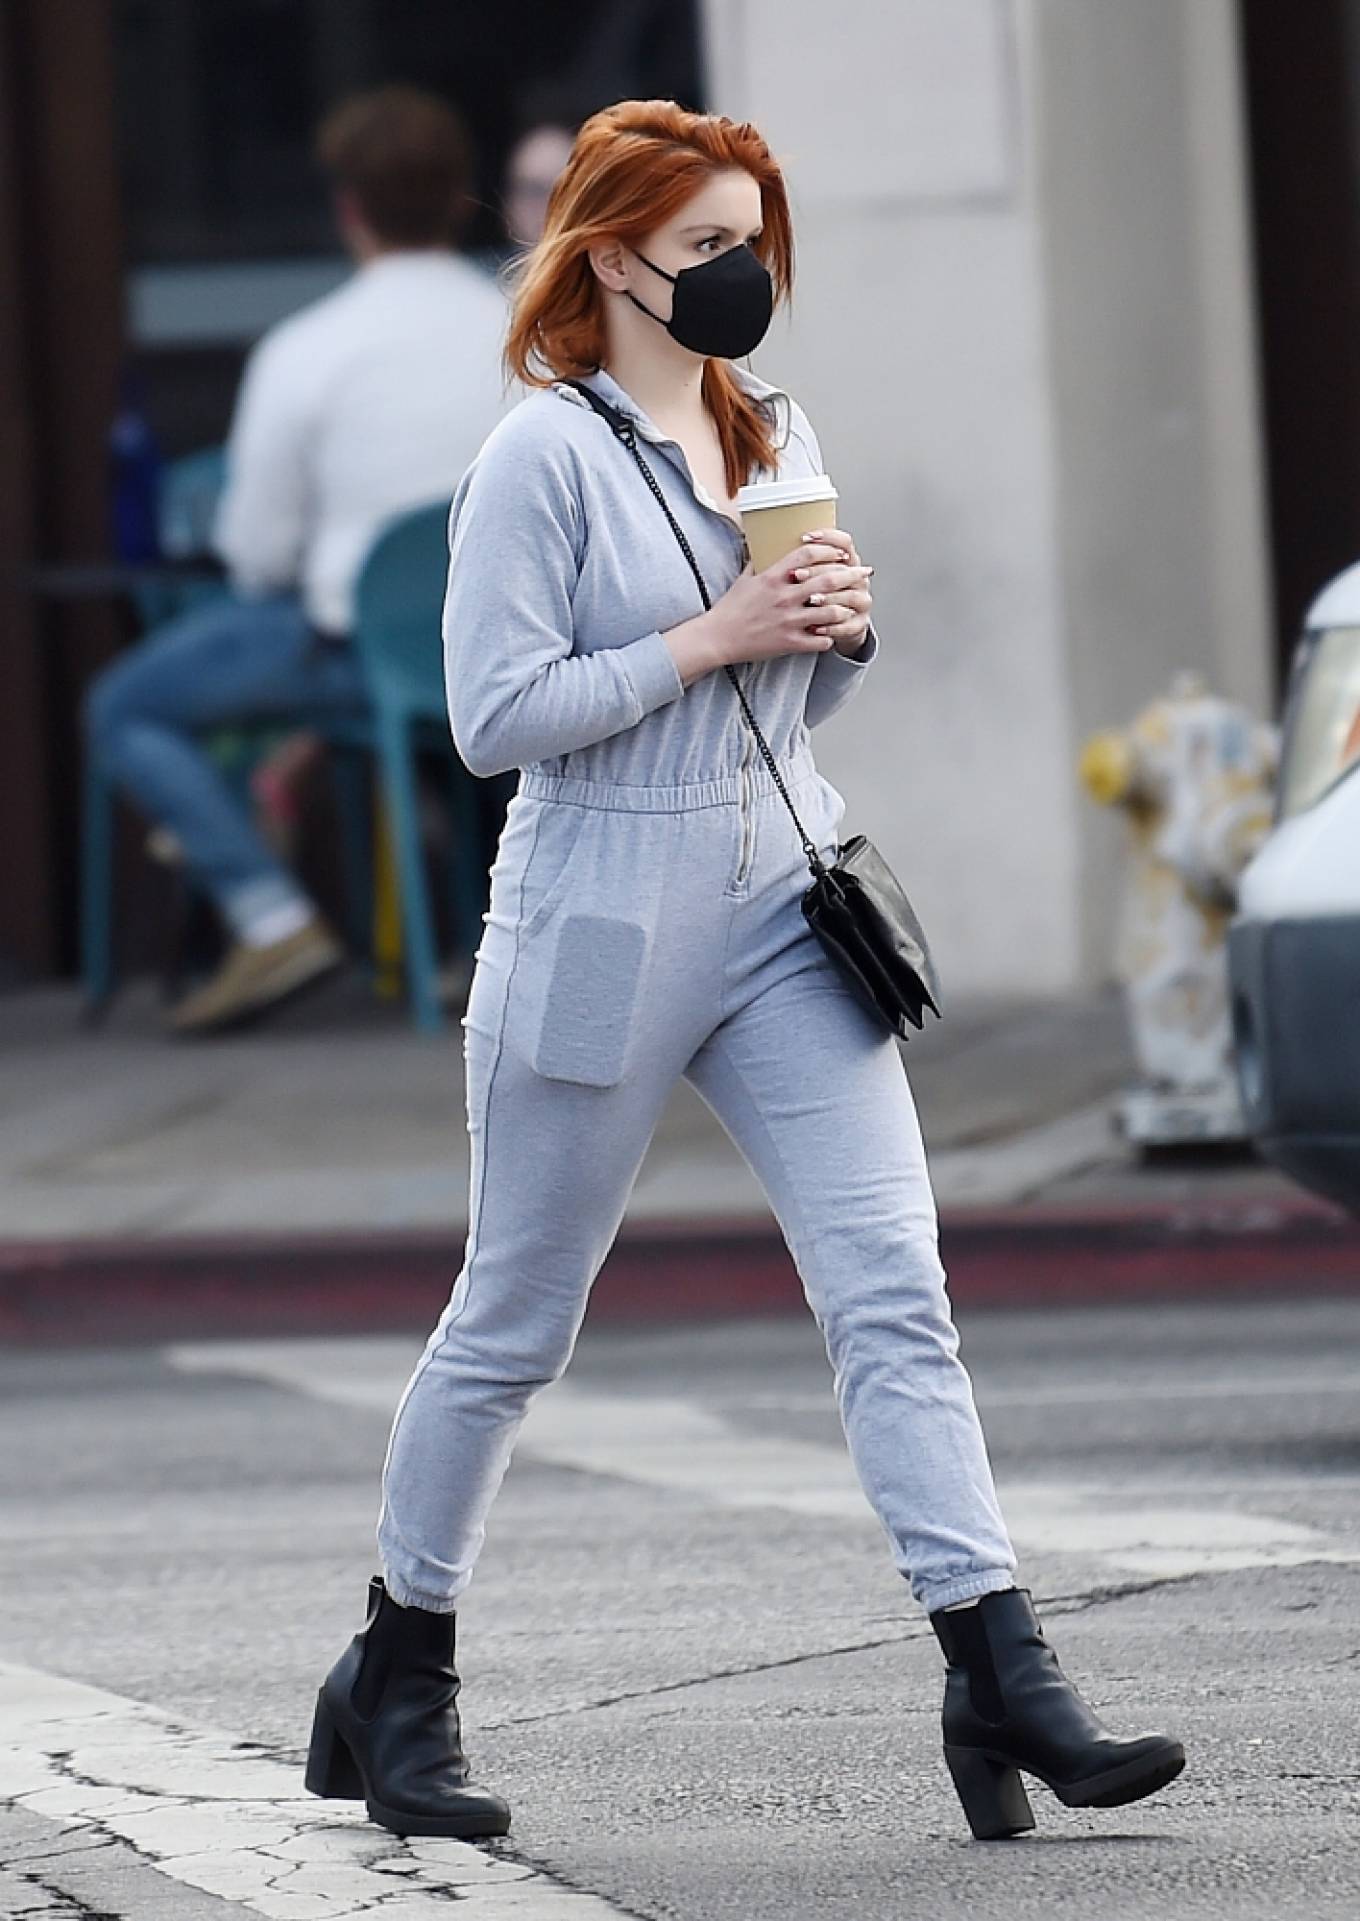 Ariel Winter 2021 : Ariel Winter – Grabs a cup of coffee in West Hollywood-29